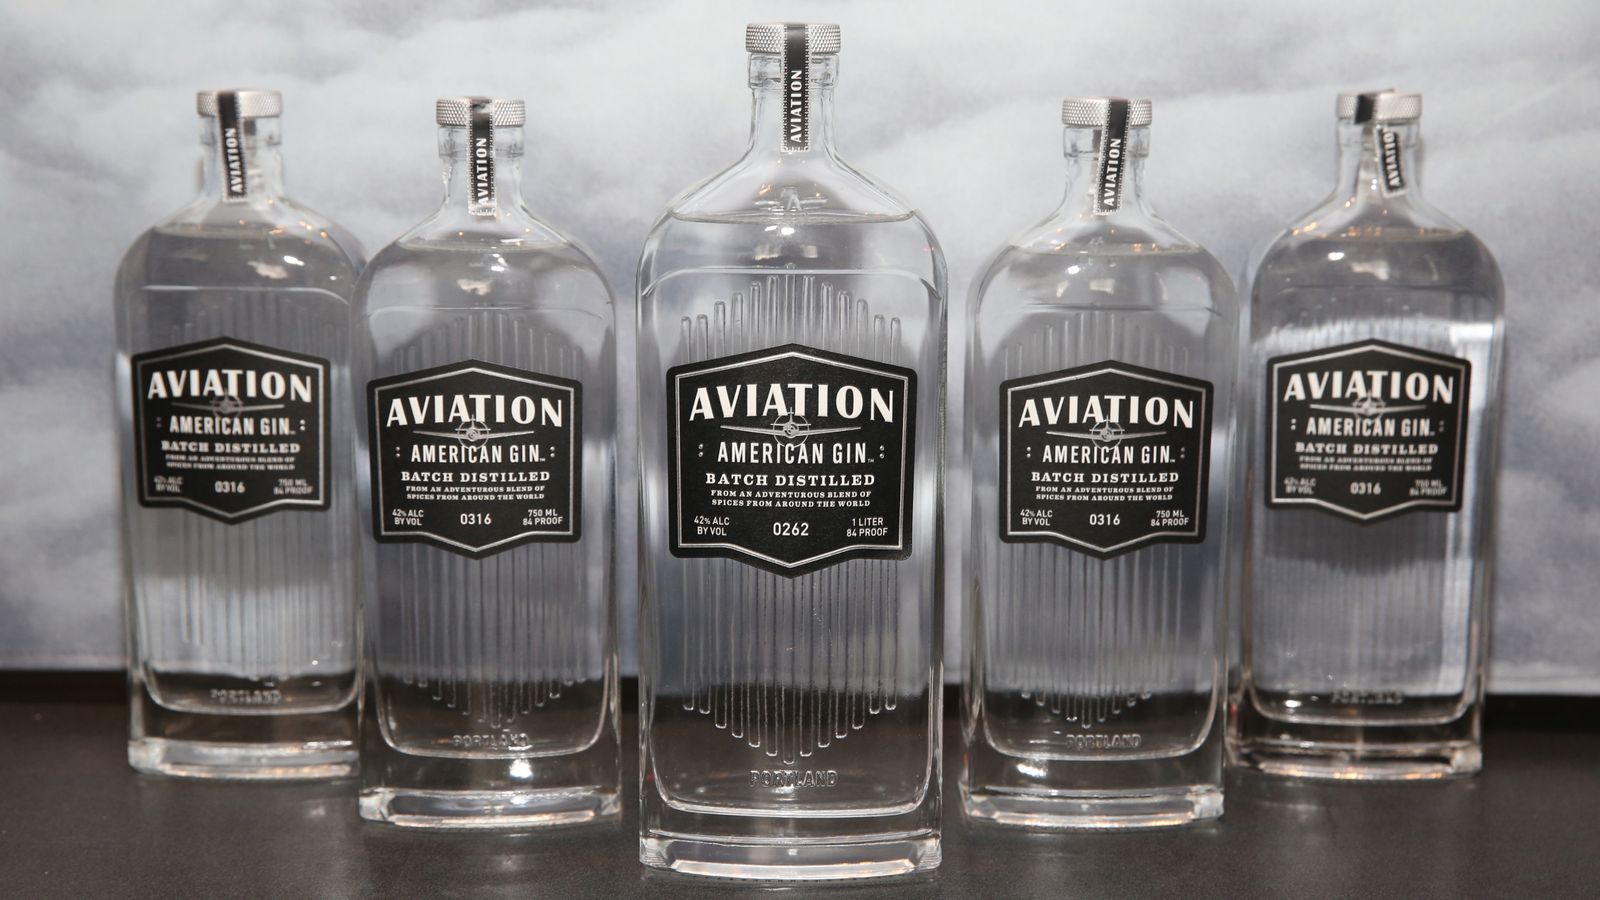 Aviation reported 100% growth in sales volumes last year as demand for premium gin surges globally